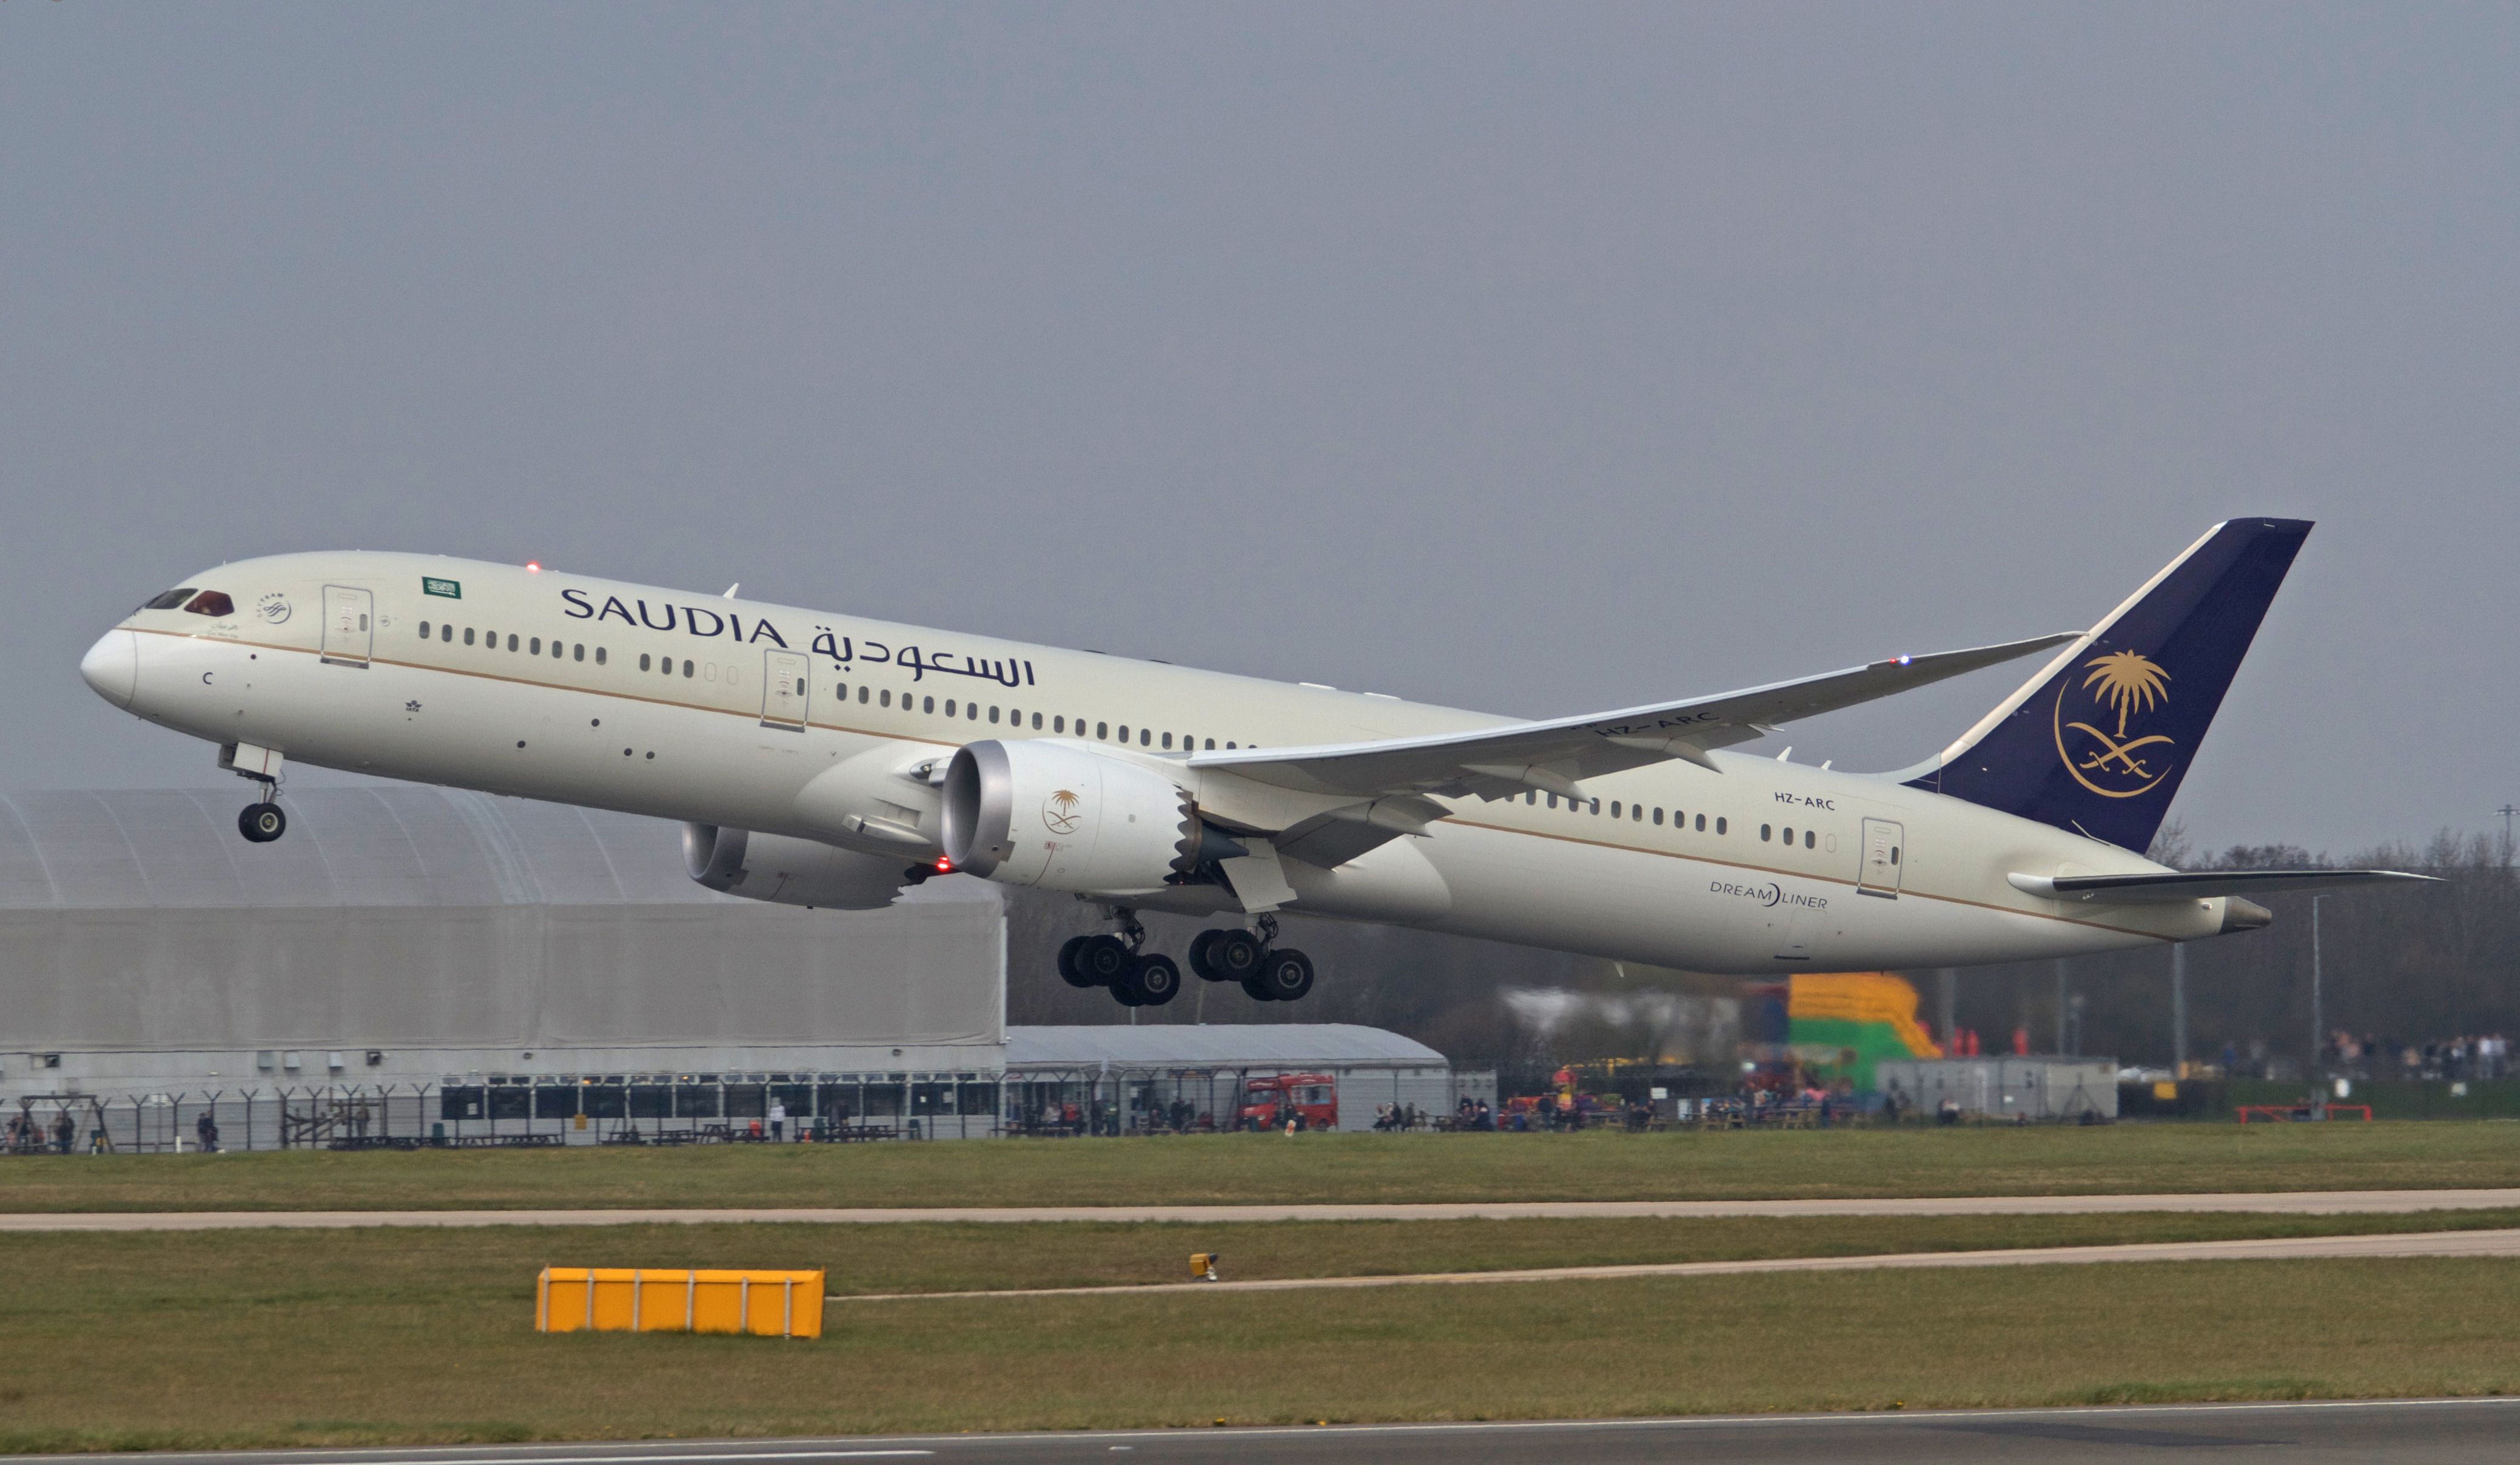 A Saudia Boeing 787 Dreamliner taking off